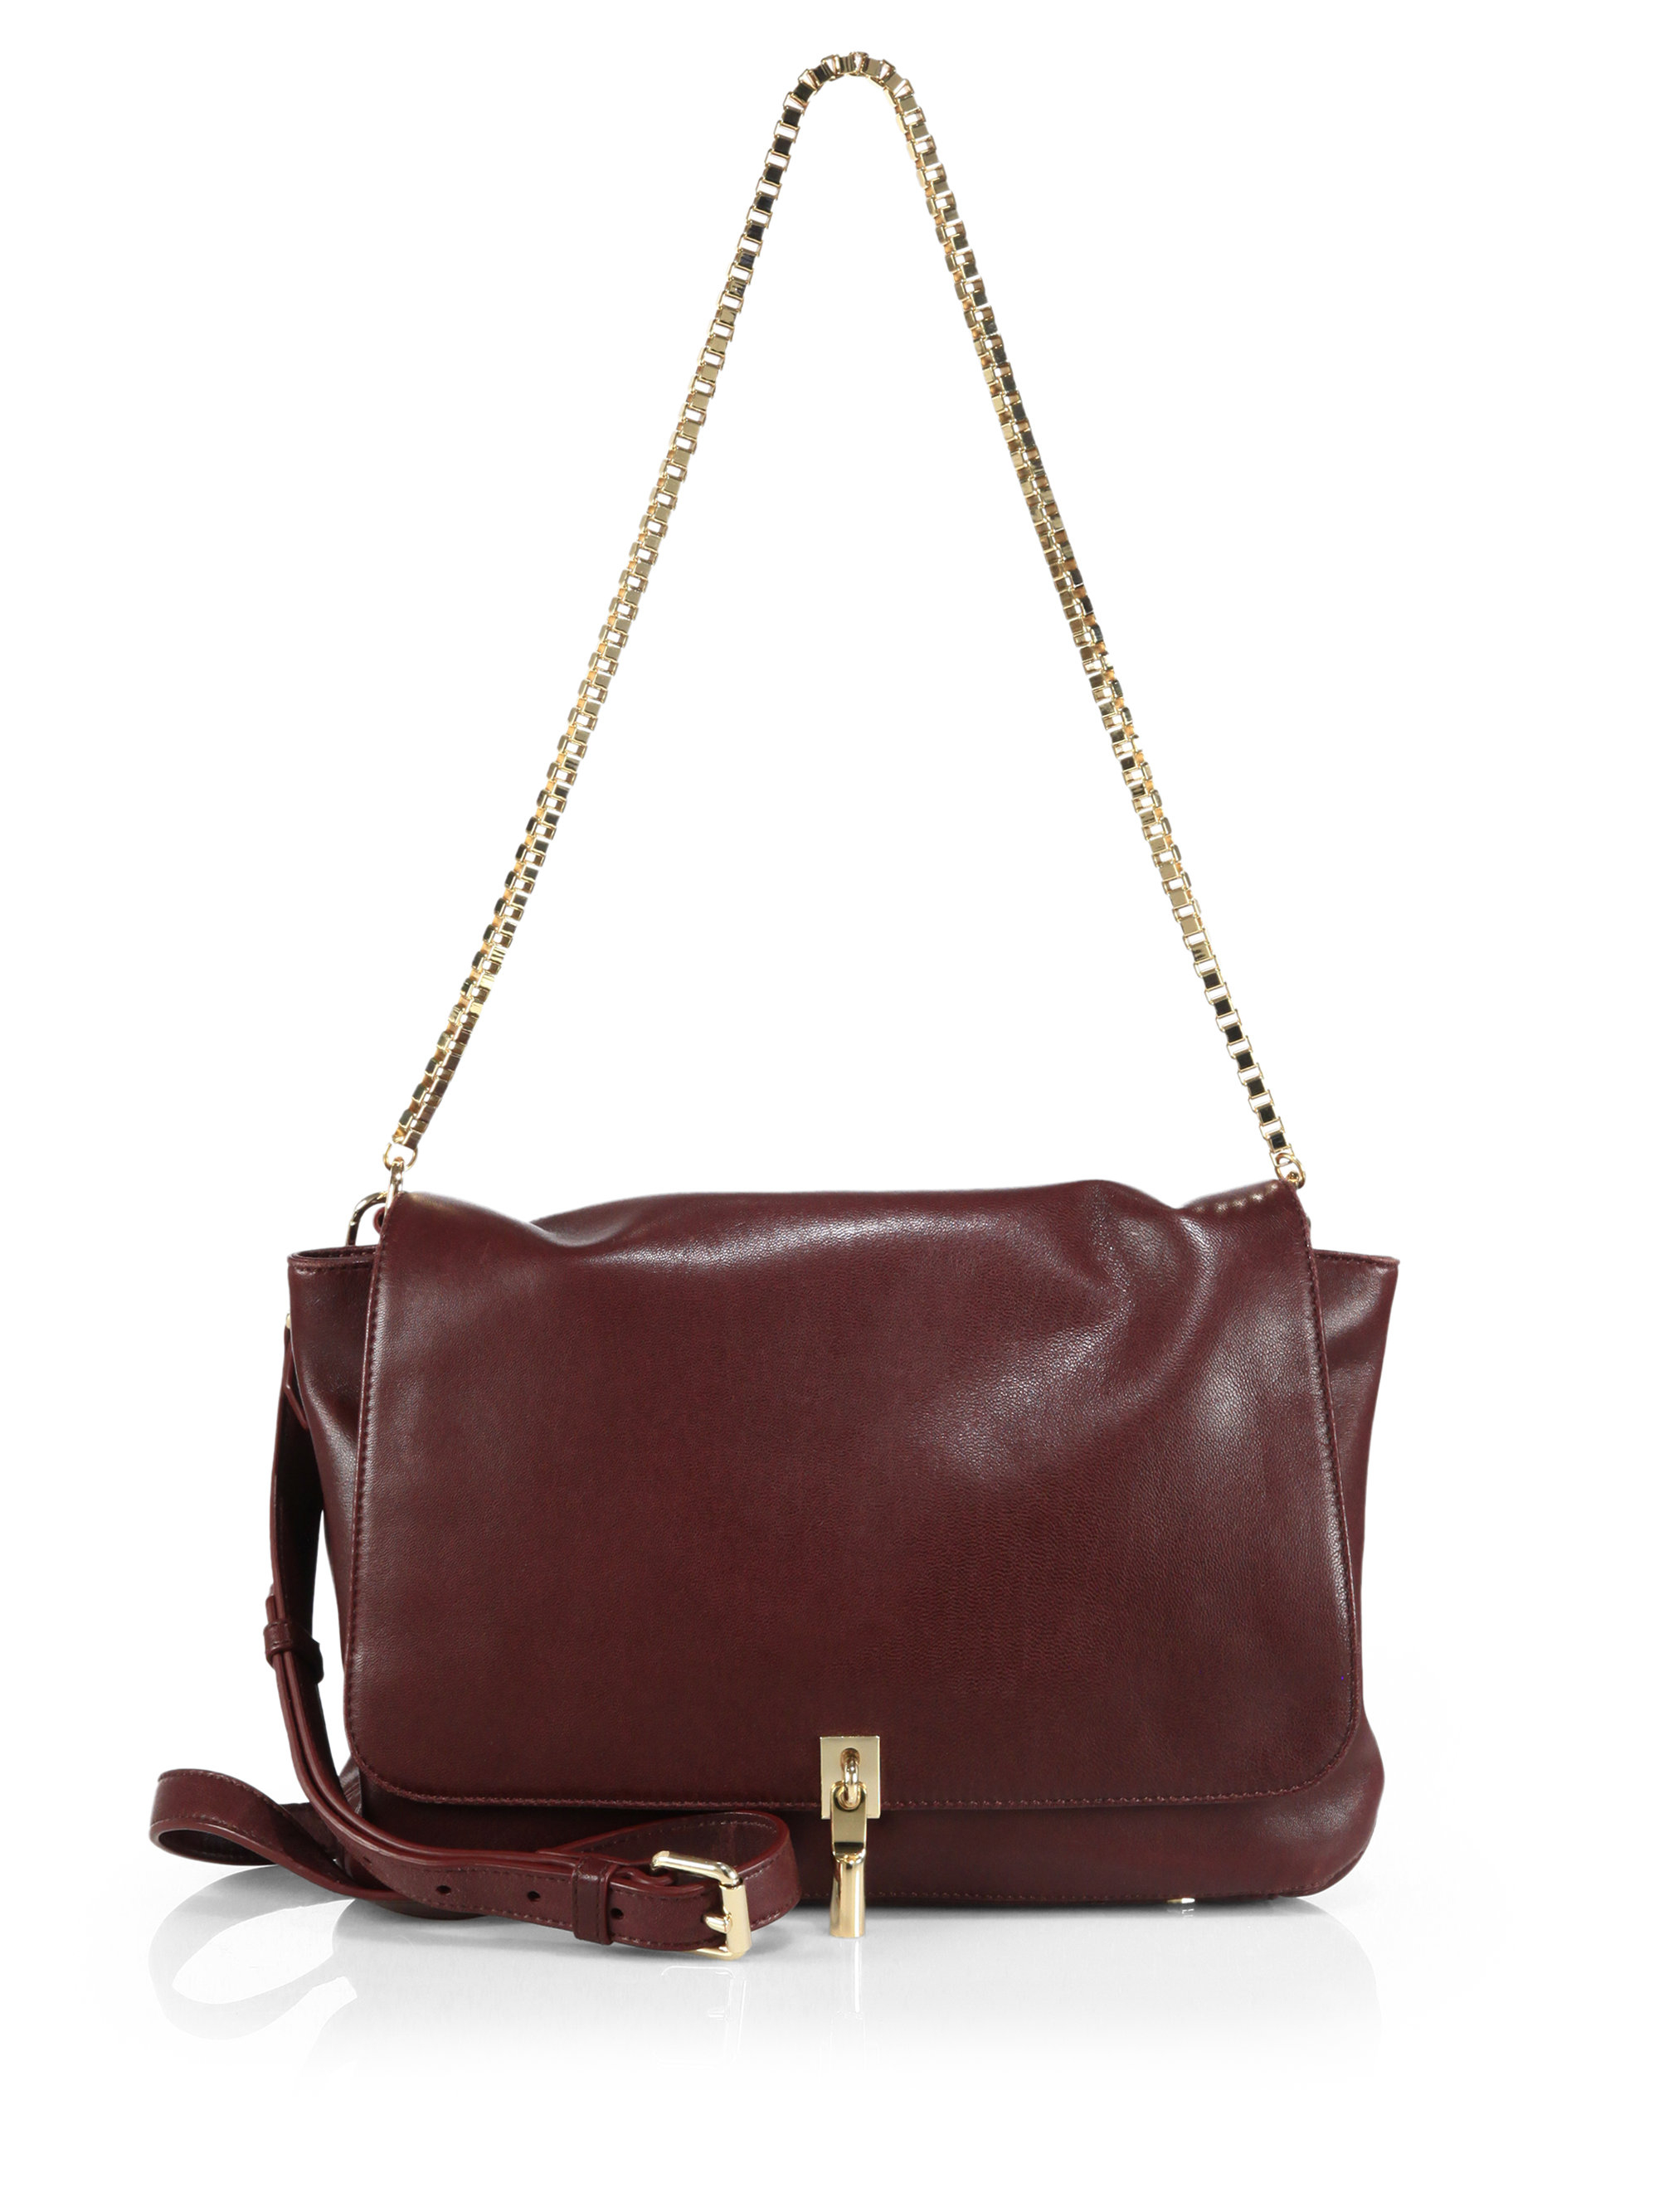 Lyst - Elizabeth And James Medium Crossbody Bag with Chain Strap in Red